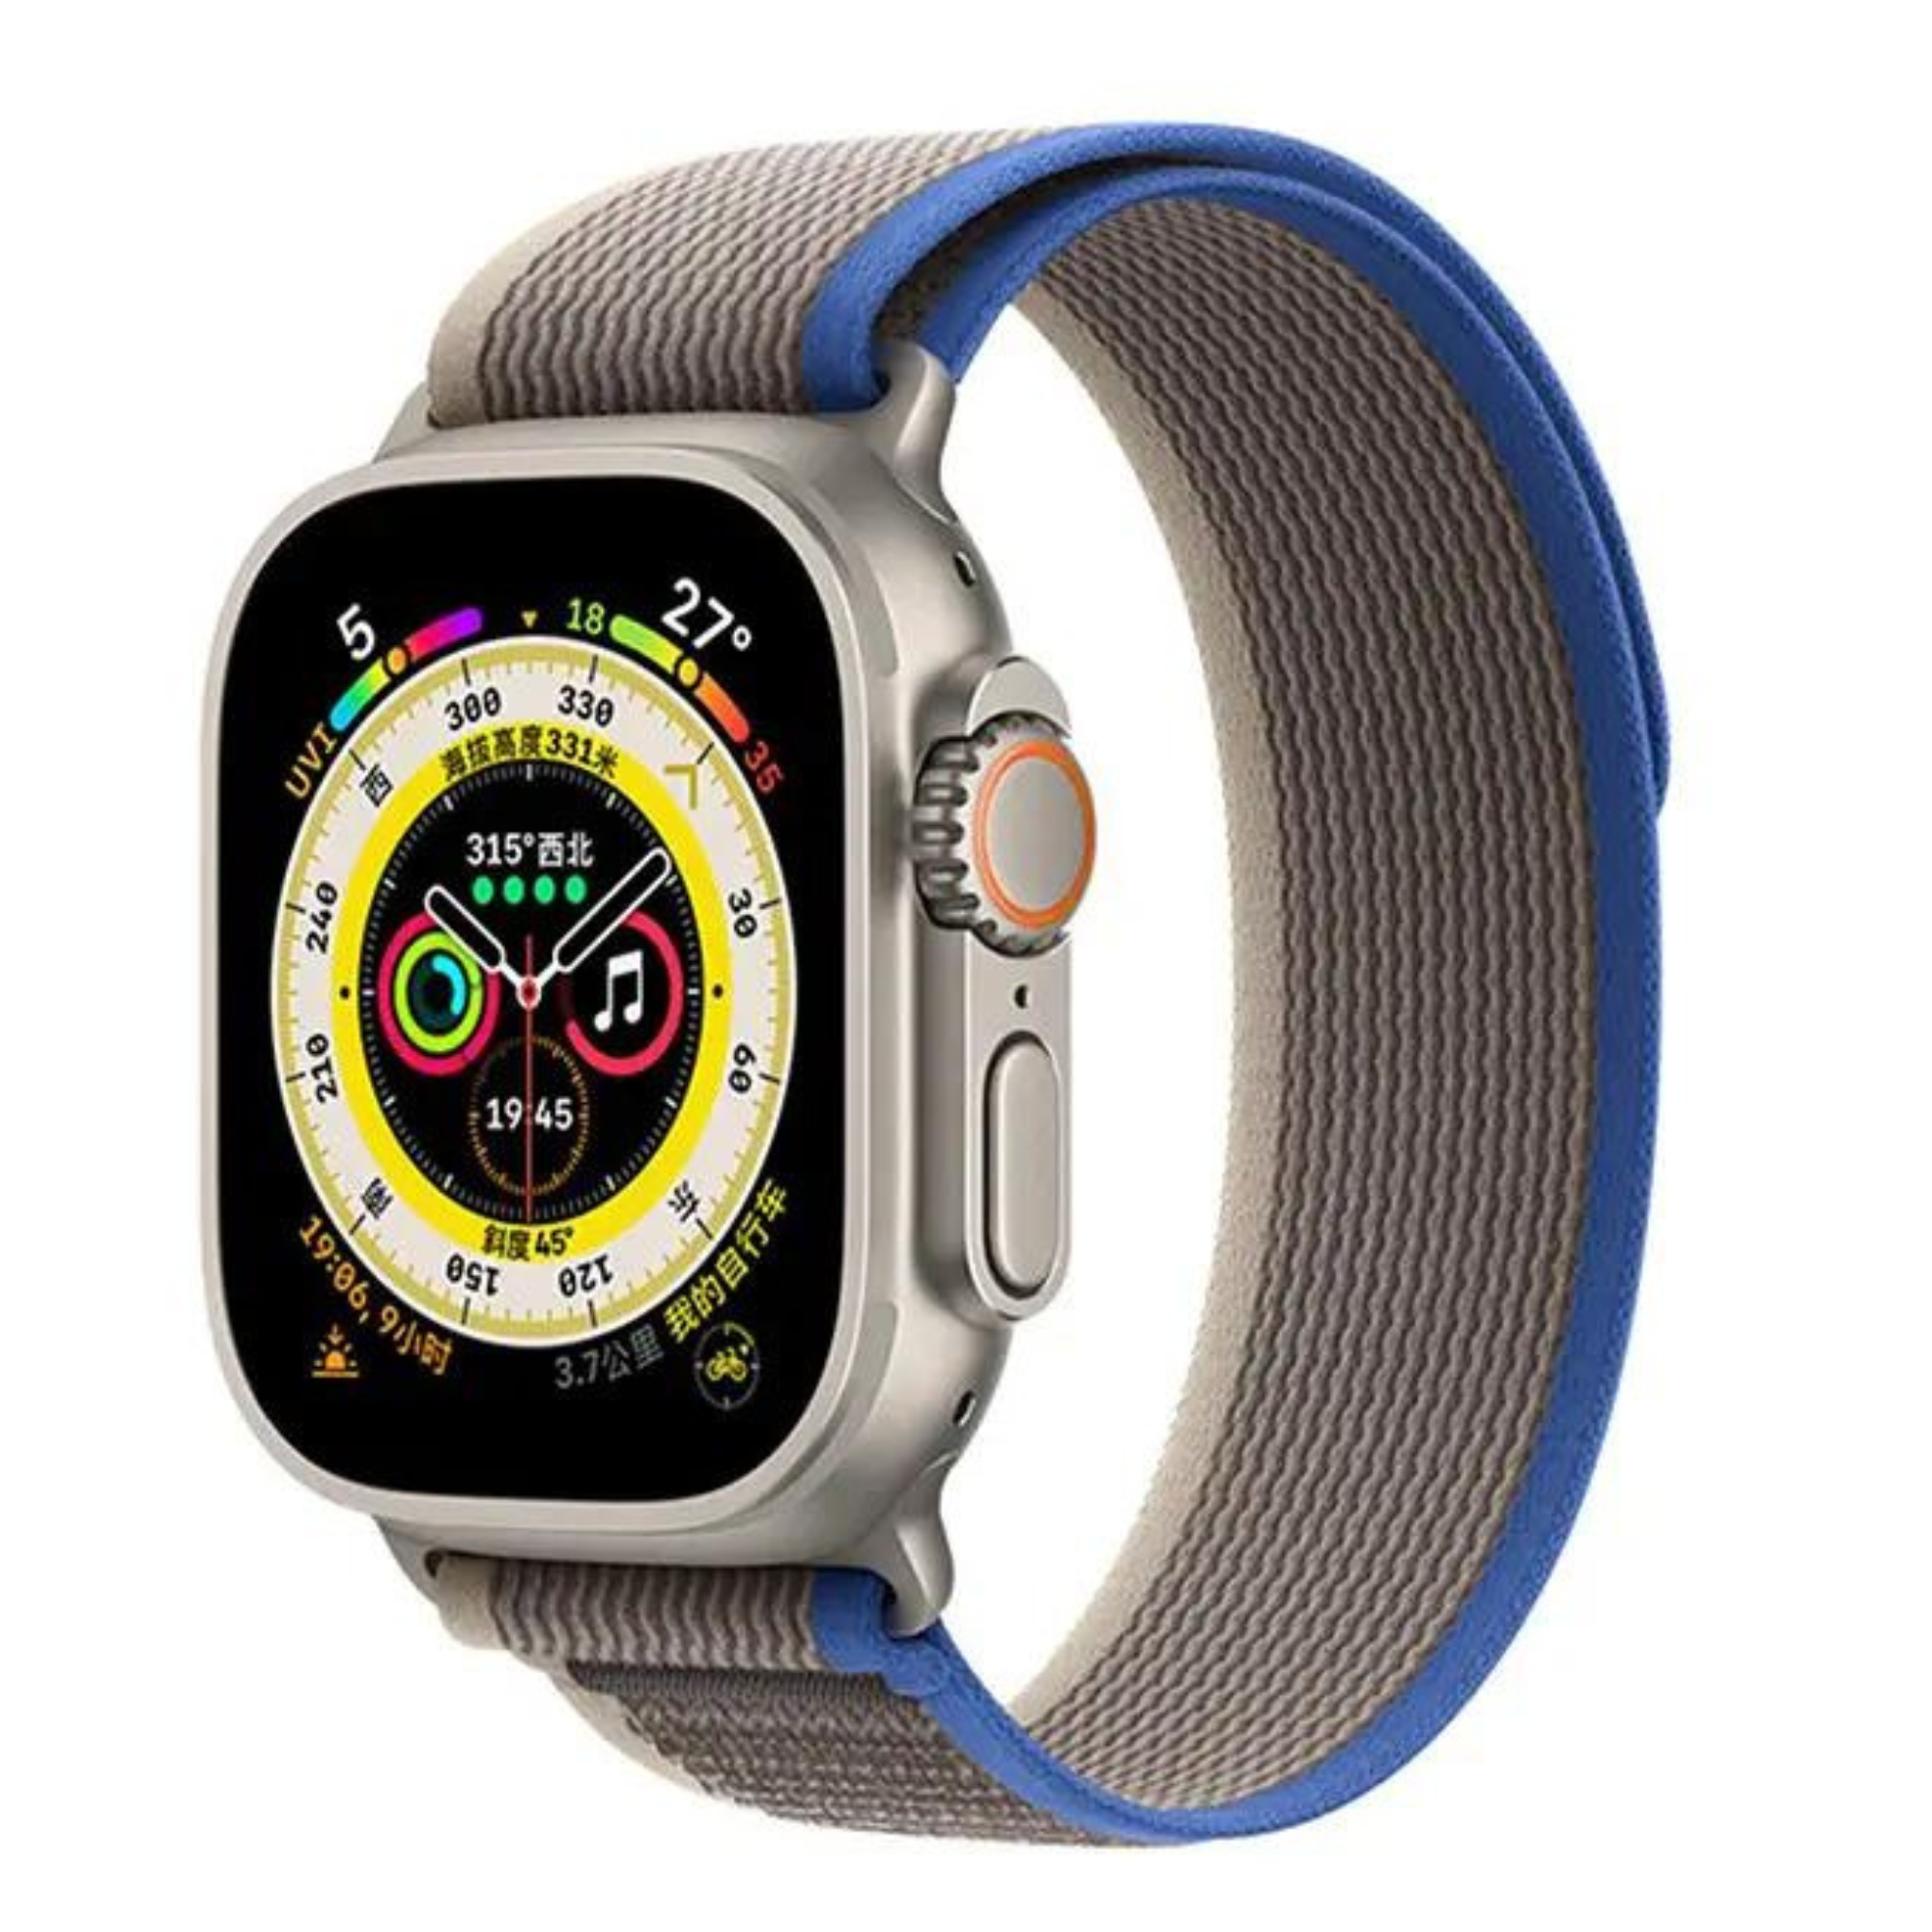 Conversion Kit For Apple Watch - Apple Watch 44mm To Apple Watch Ultra 49 Mm: Titanium Style Case + Grey Trail Band mod kits india dream watches apple watch